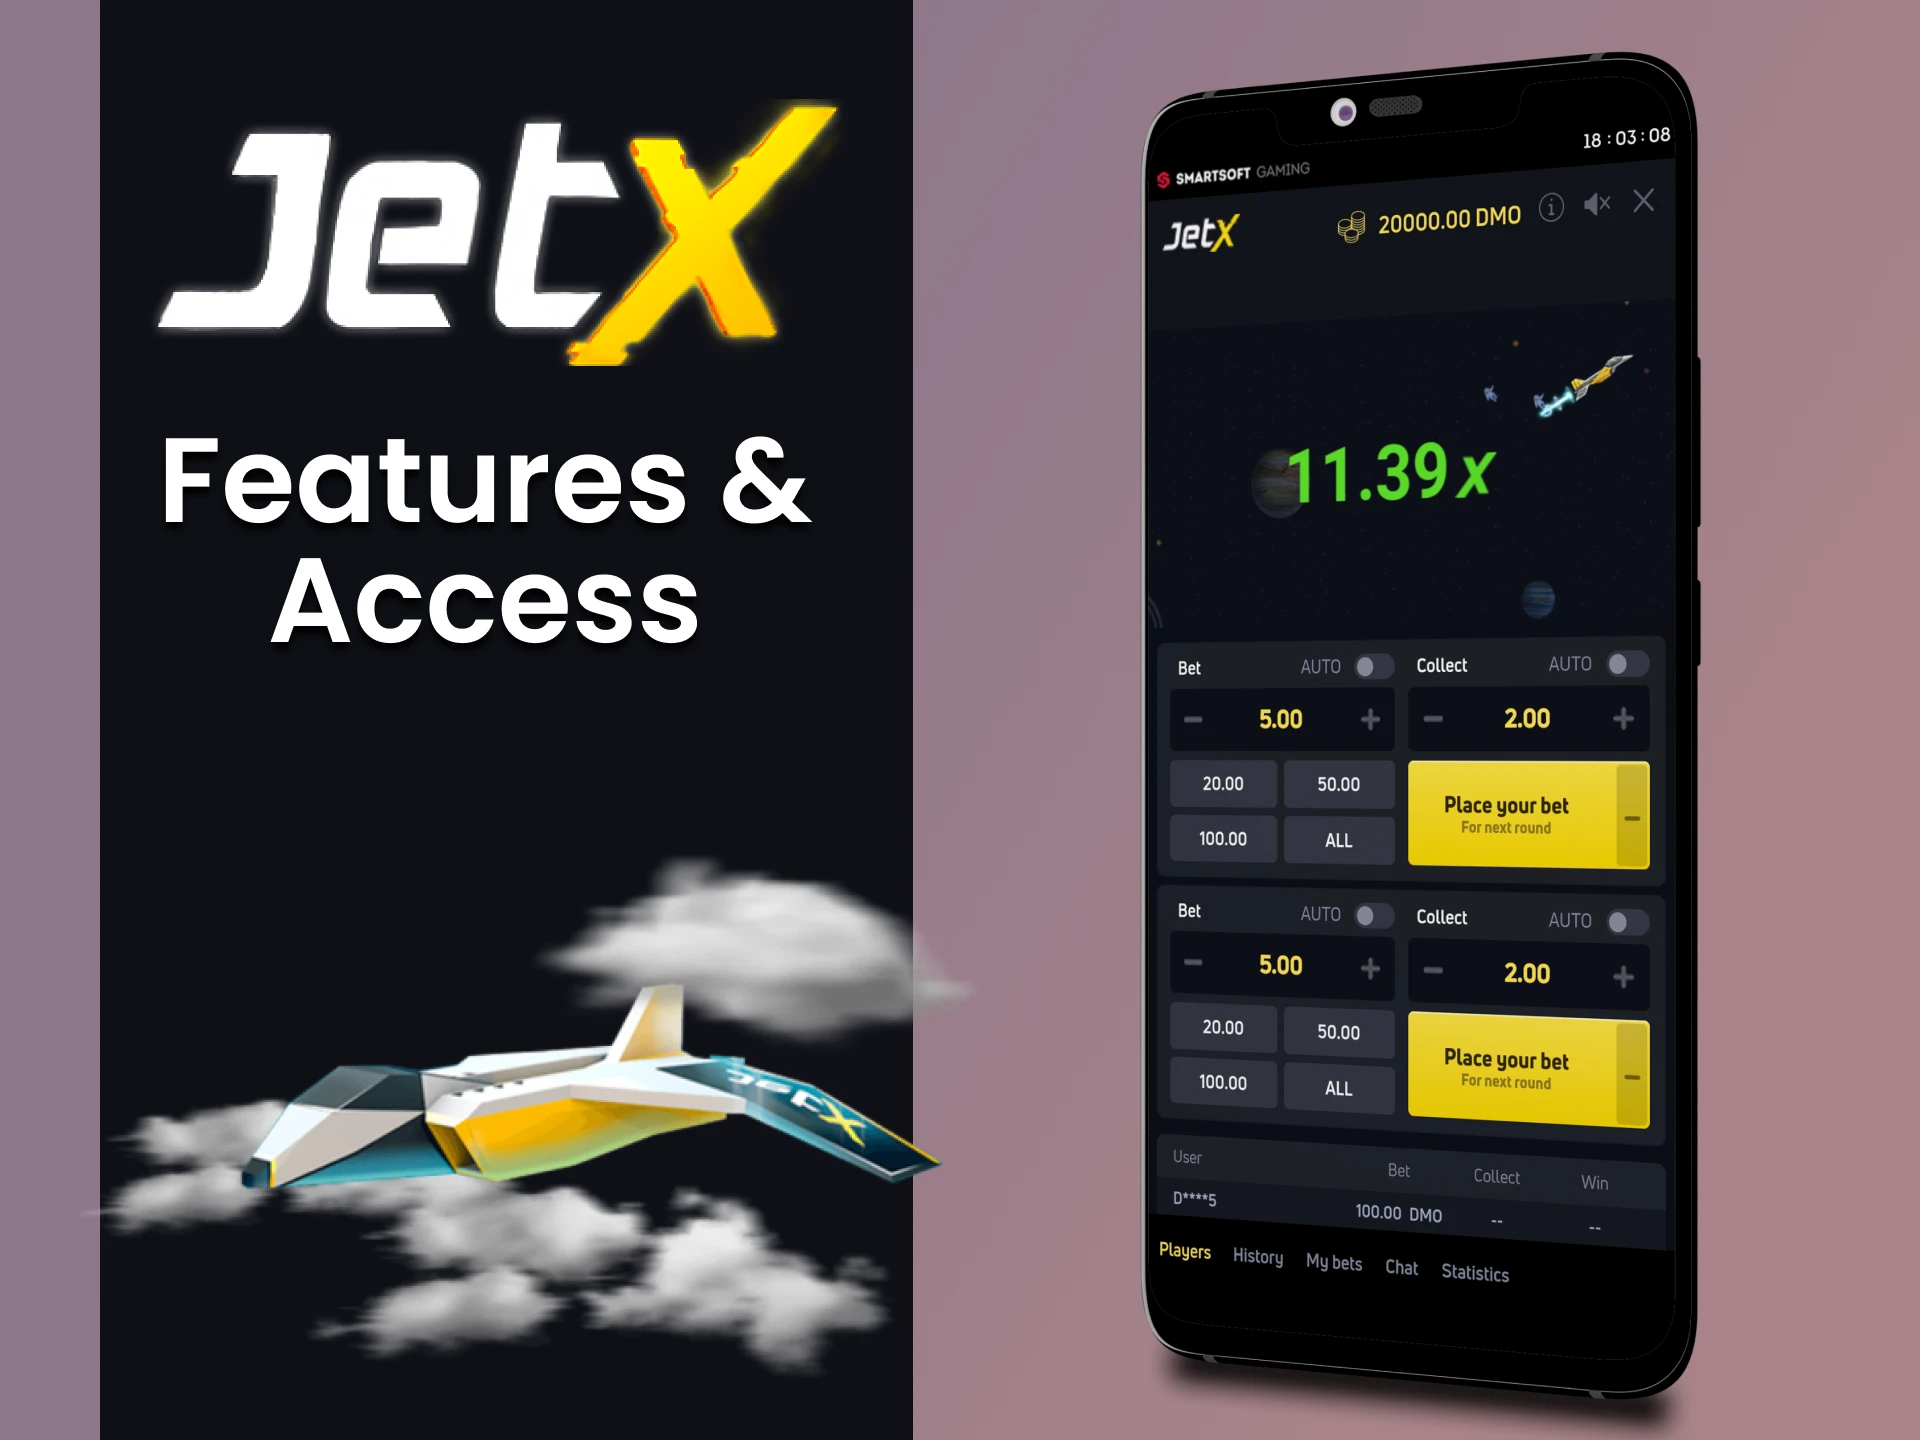 The JetX application is waiting for improvements.